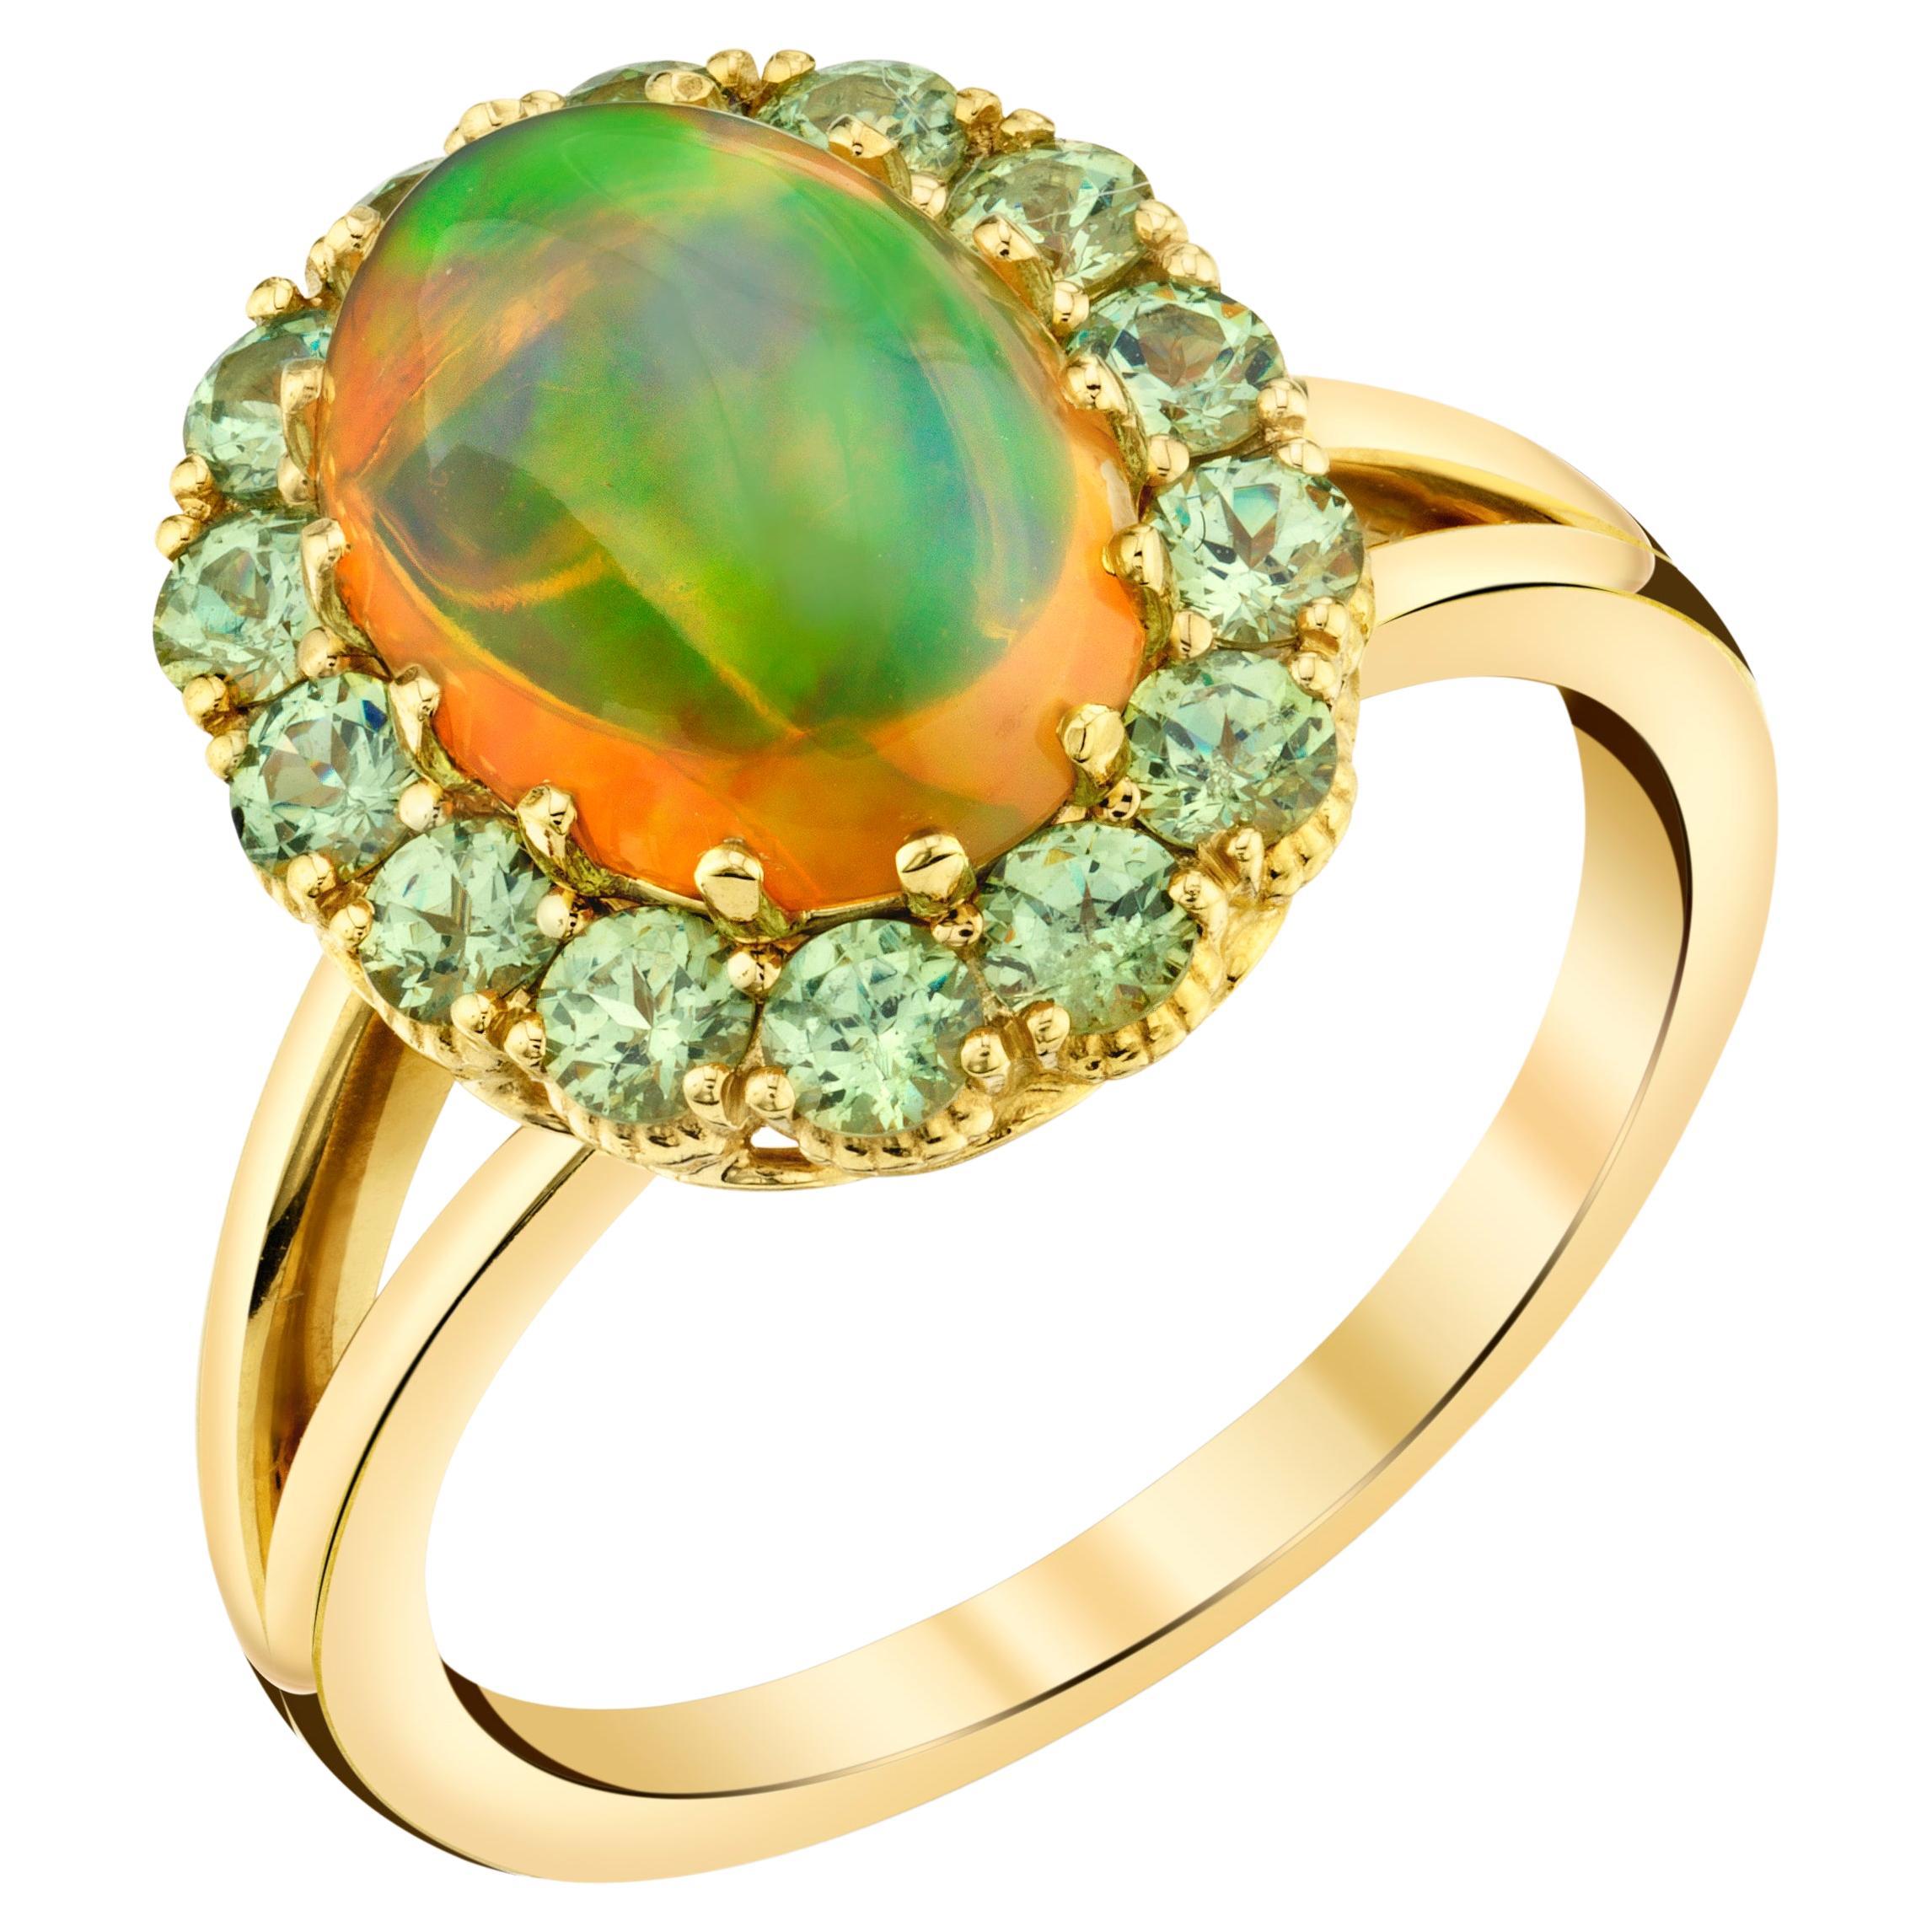 2.40 Carat Opal and Tsavorite Garnet Halo Cocktail Ring in 18k Yellow Gold  For Sale